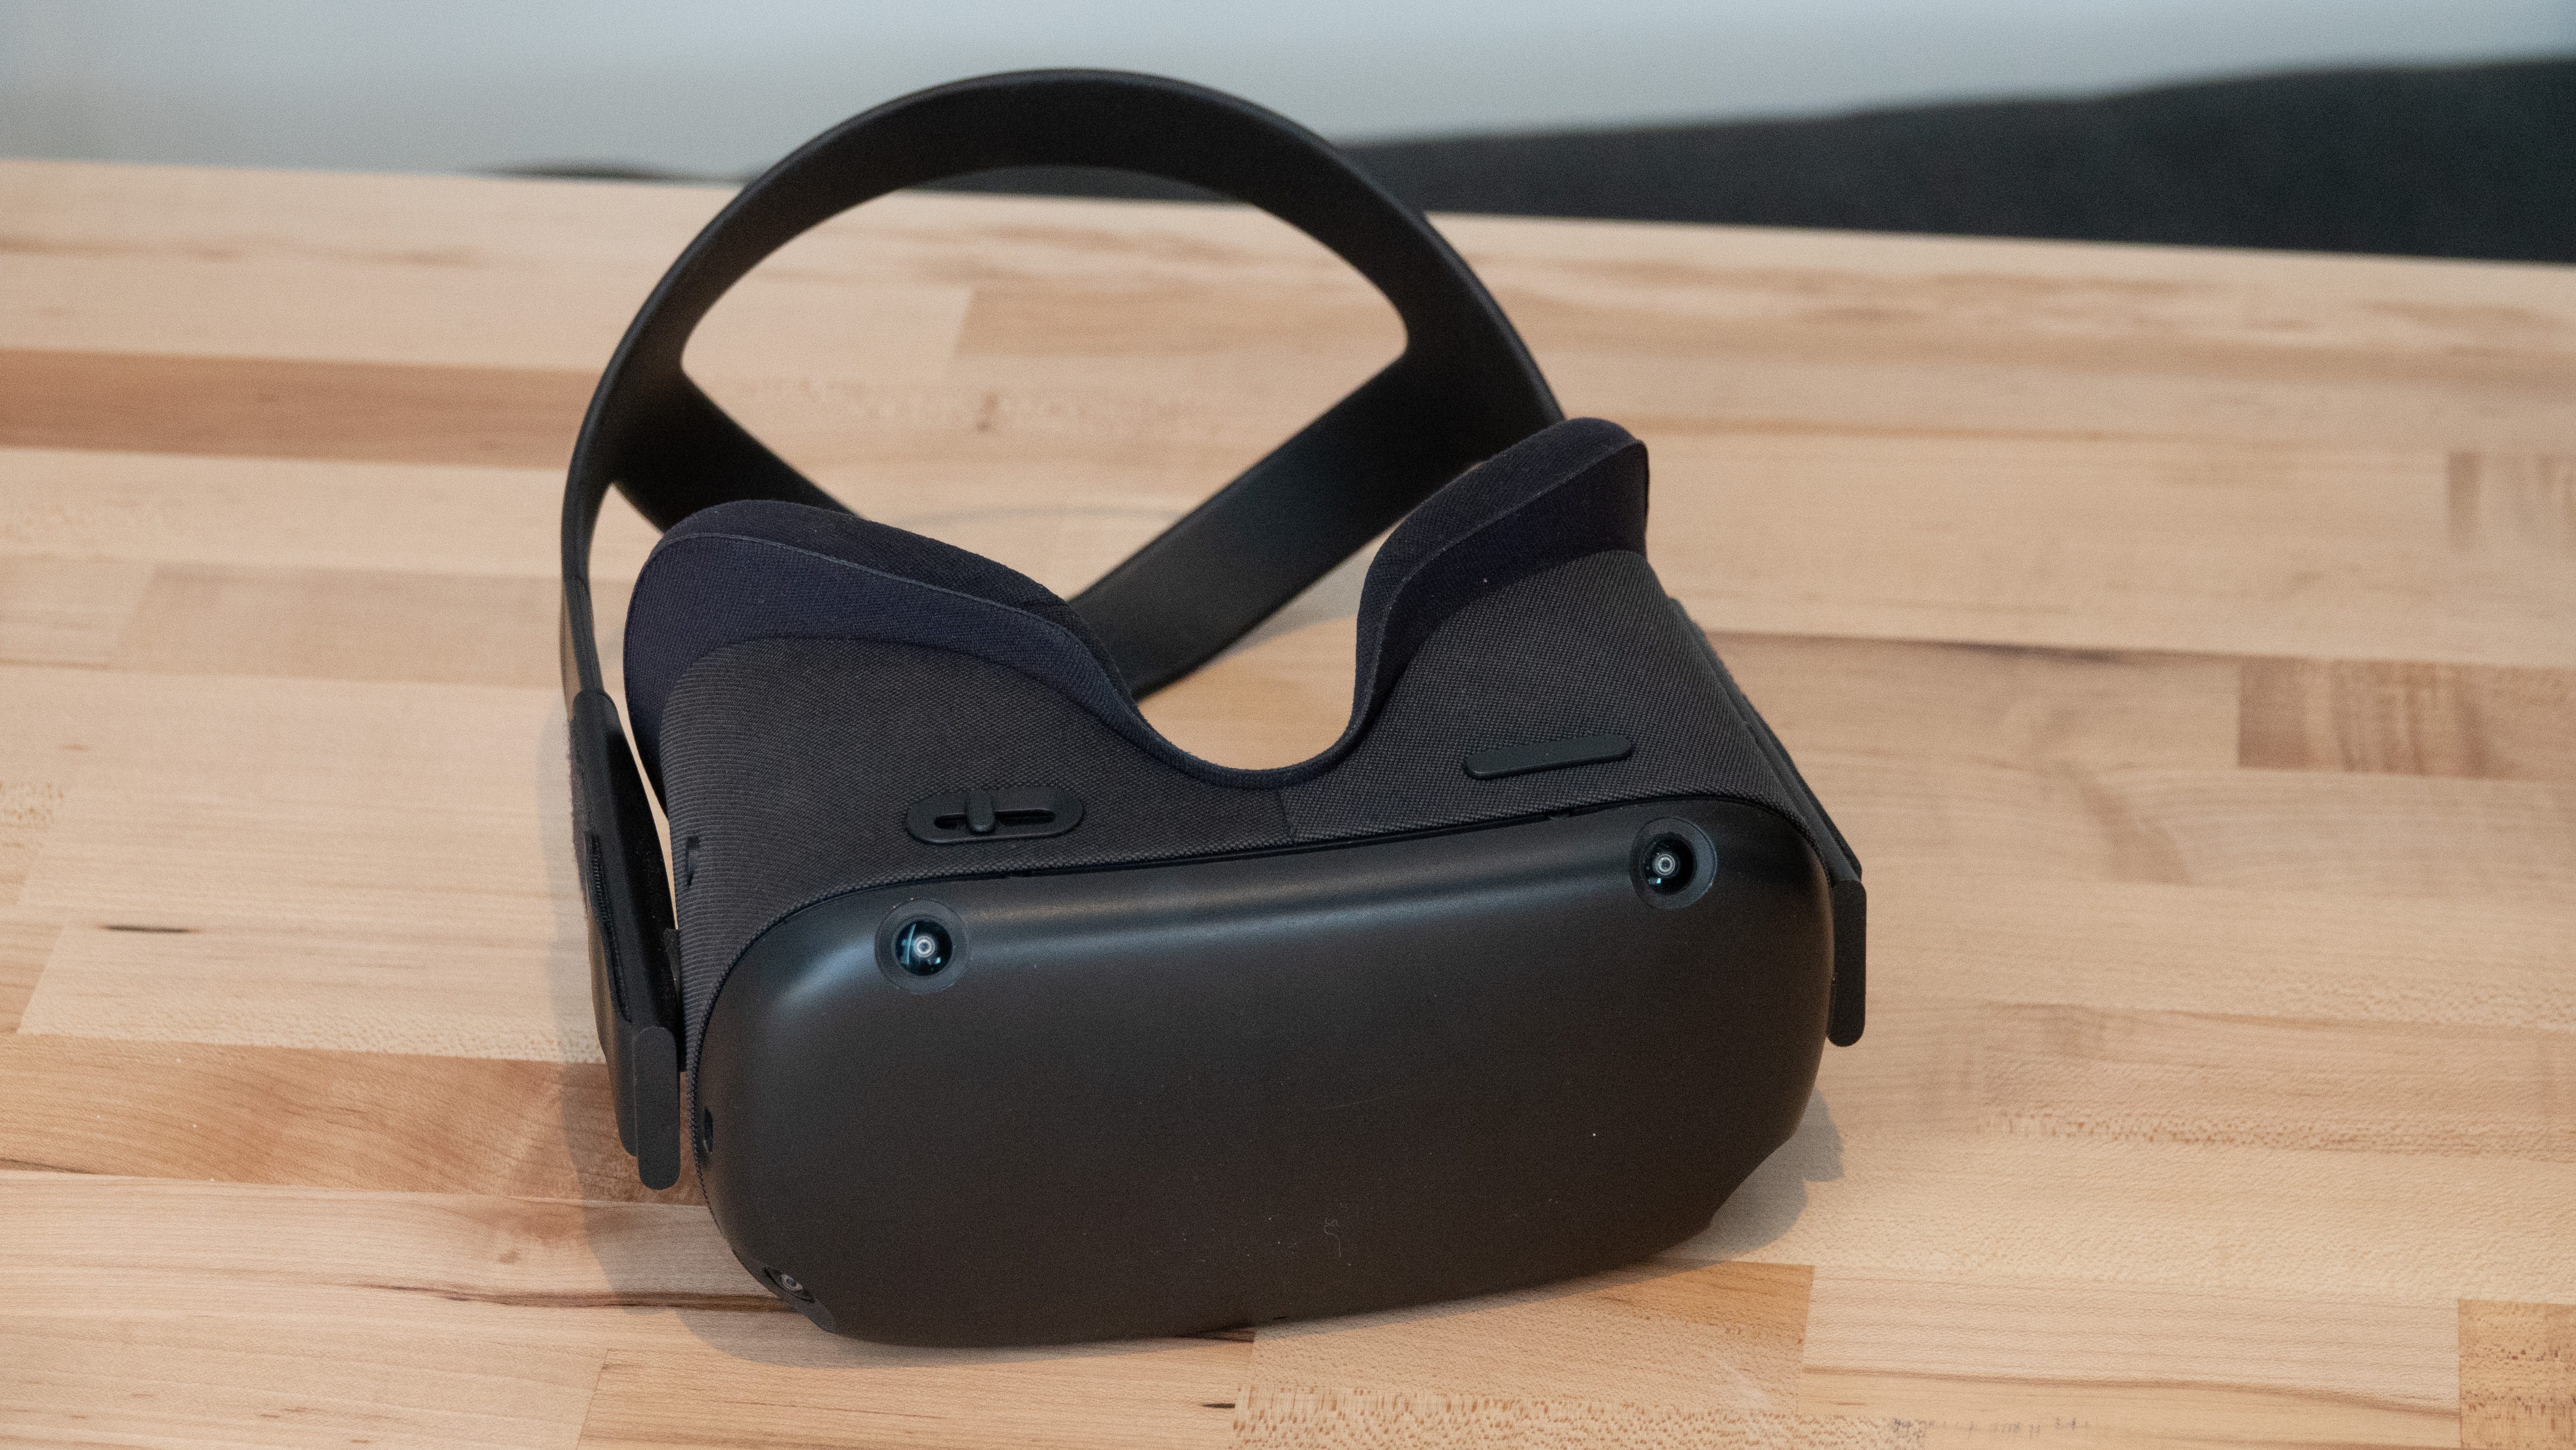 oculus quest cheapest place to buy